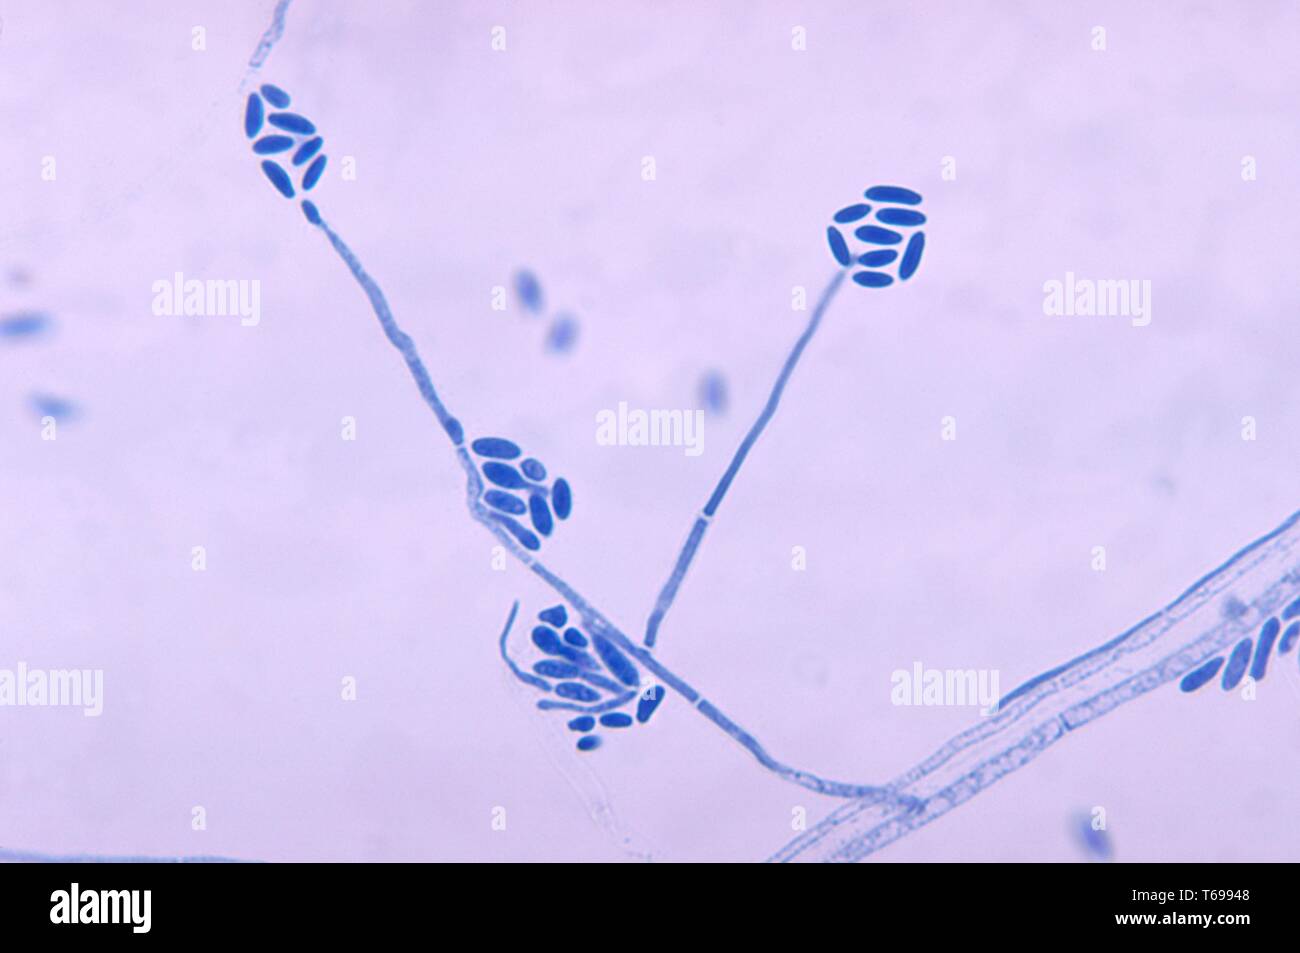 Photomicrograph of conidia and conidiophores of the fungus Acremonium falciforme, 1970. Image courtesy Centers for Disease Control and Prevention (CDC). () Stock Photo